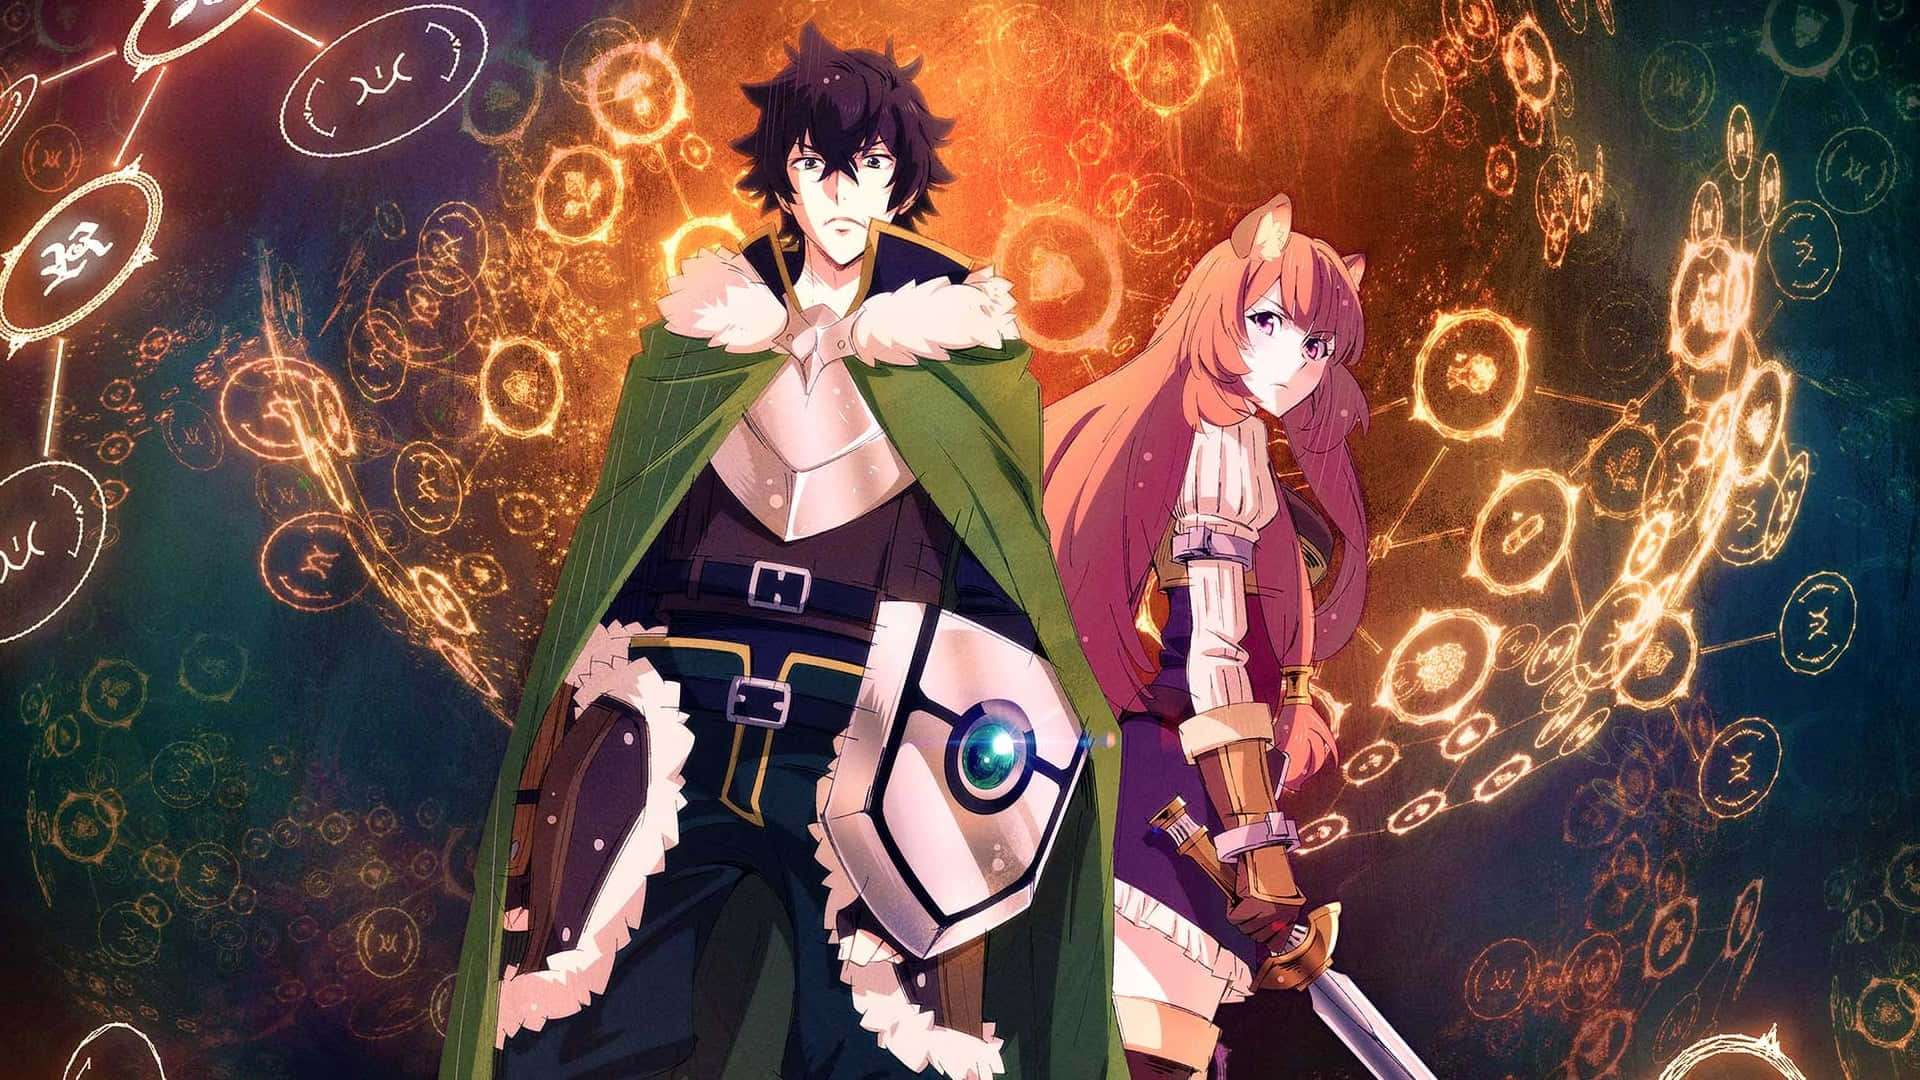 Striking a pose with the ultimate shield hero